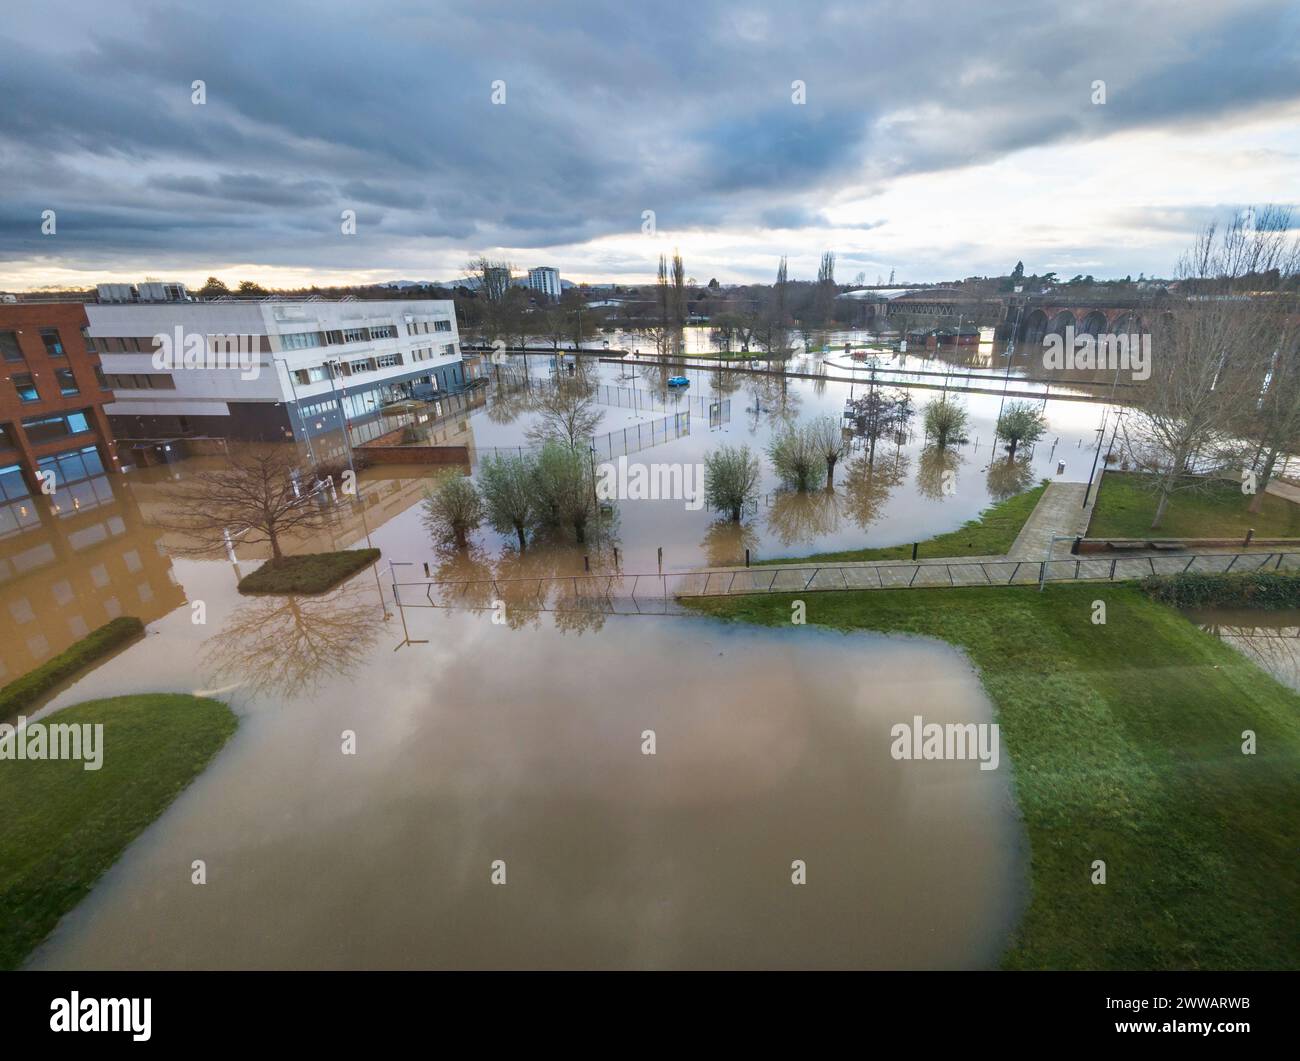 Extreme weather conditions,extensive flooding,after heavy,prolonged rain and storms,high,overwhelming river water levels,engulfing fields and properti Stock Photo